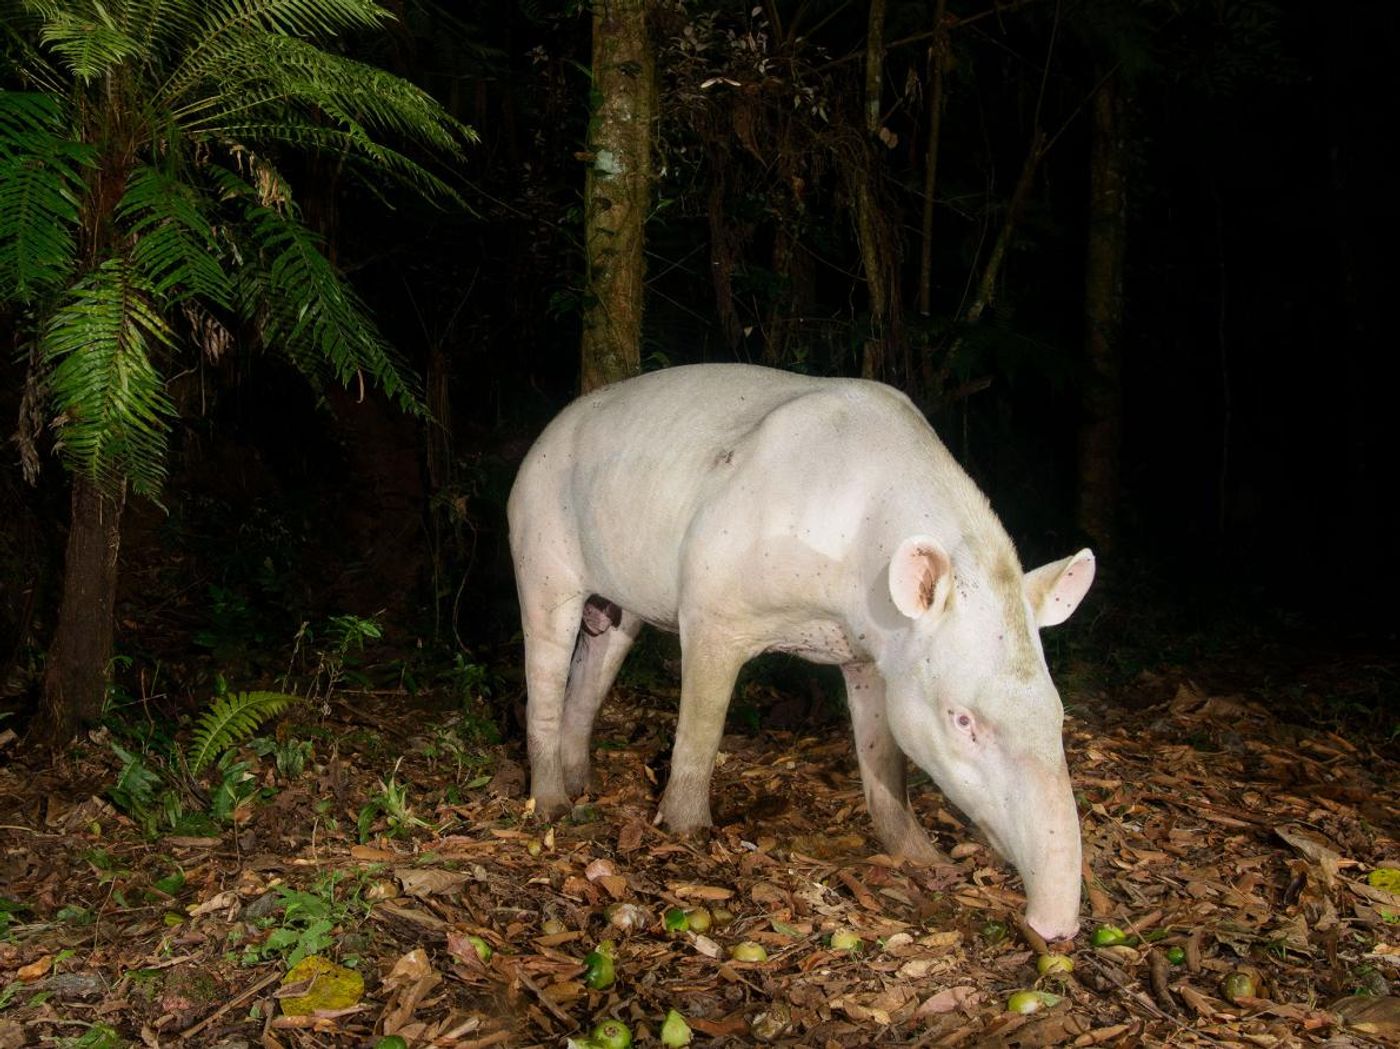 The albino tapir was photographed using a camera trap in Votorantim Reserve in May 2014.